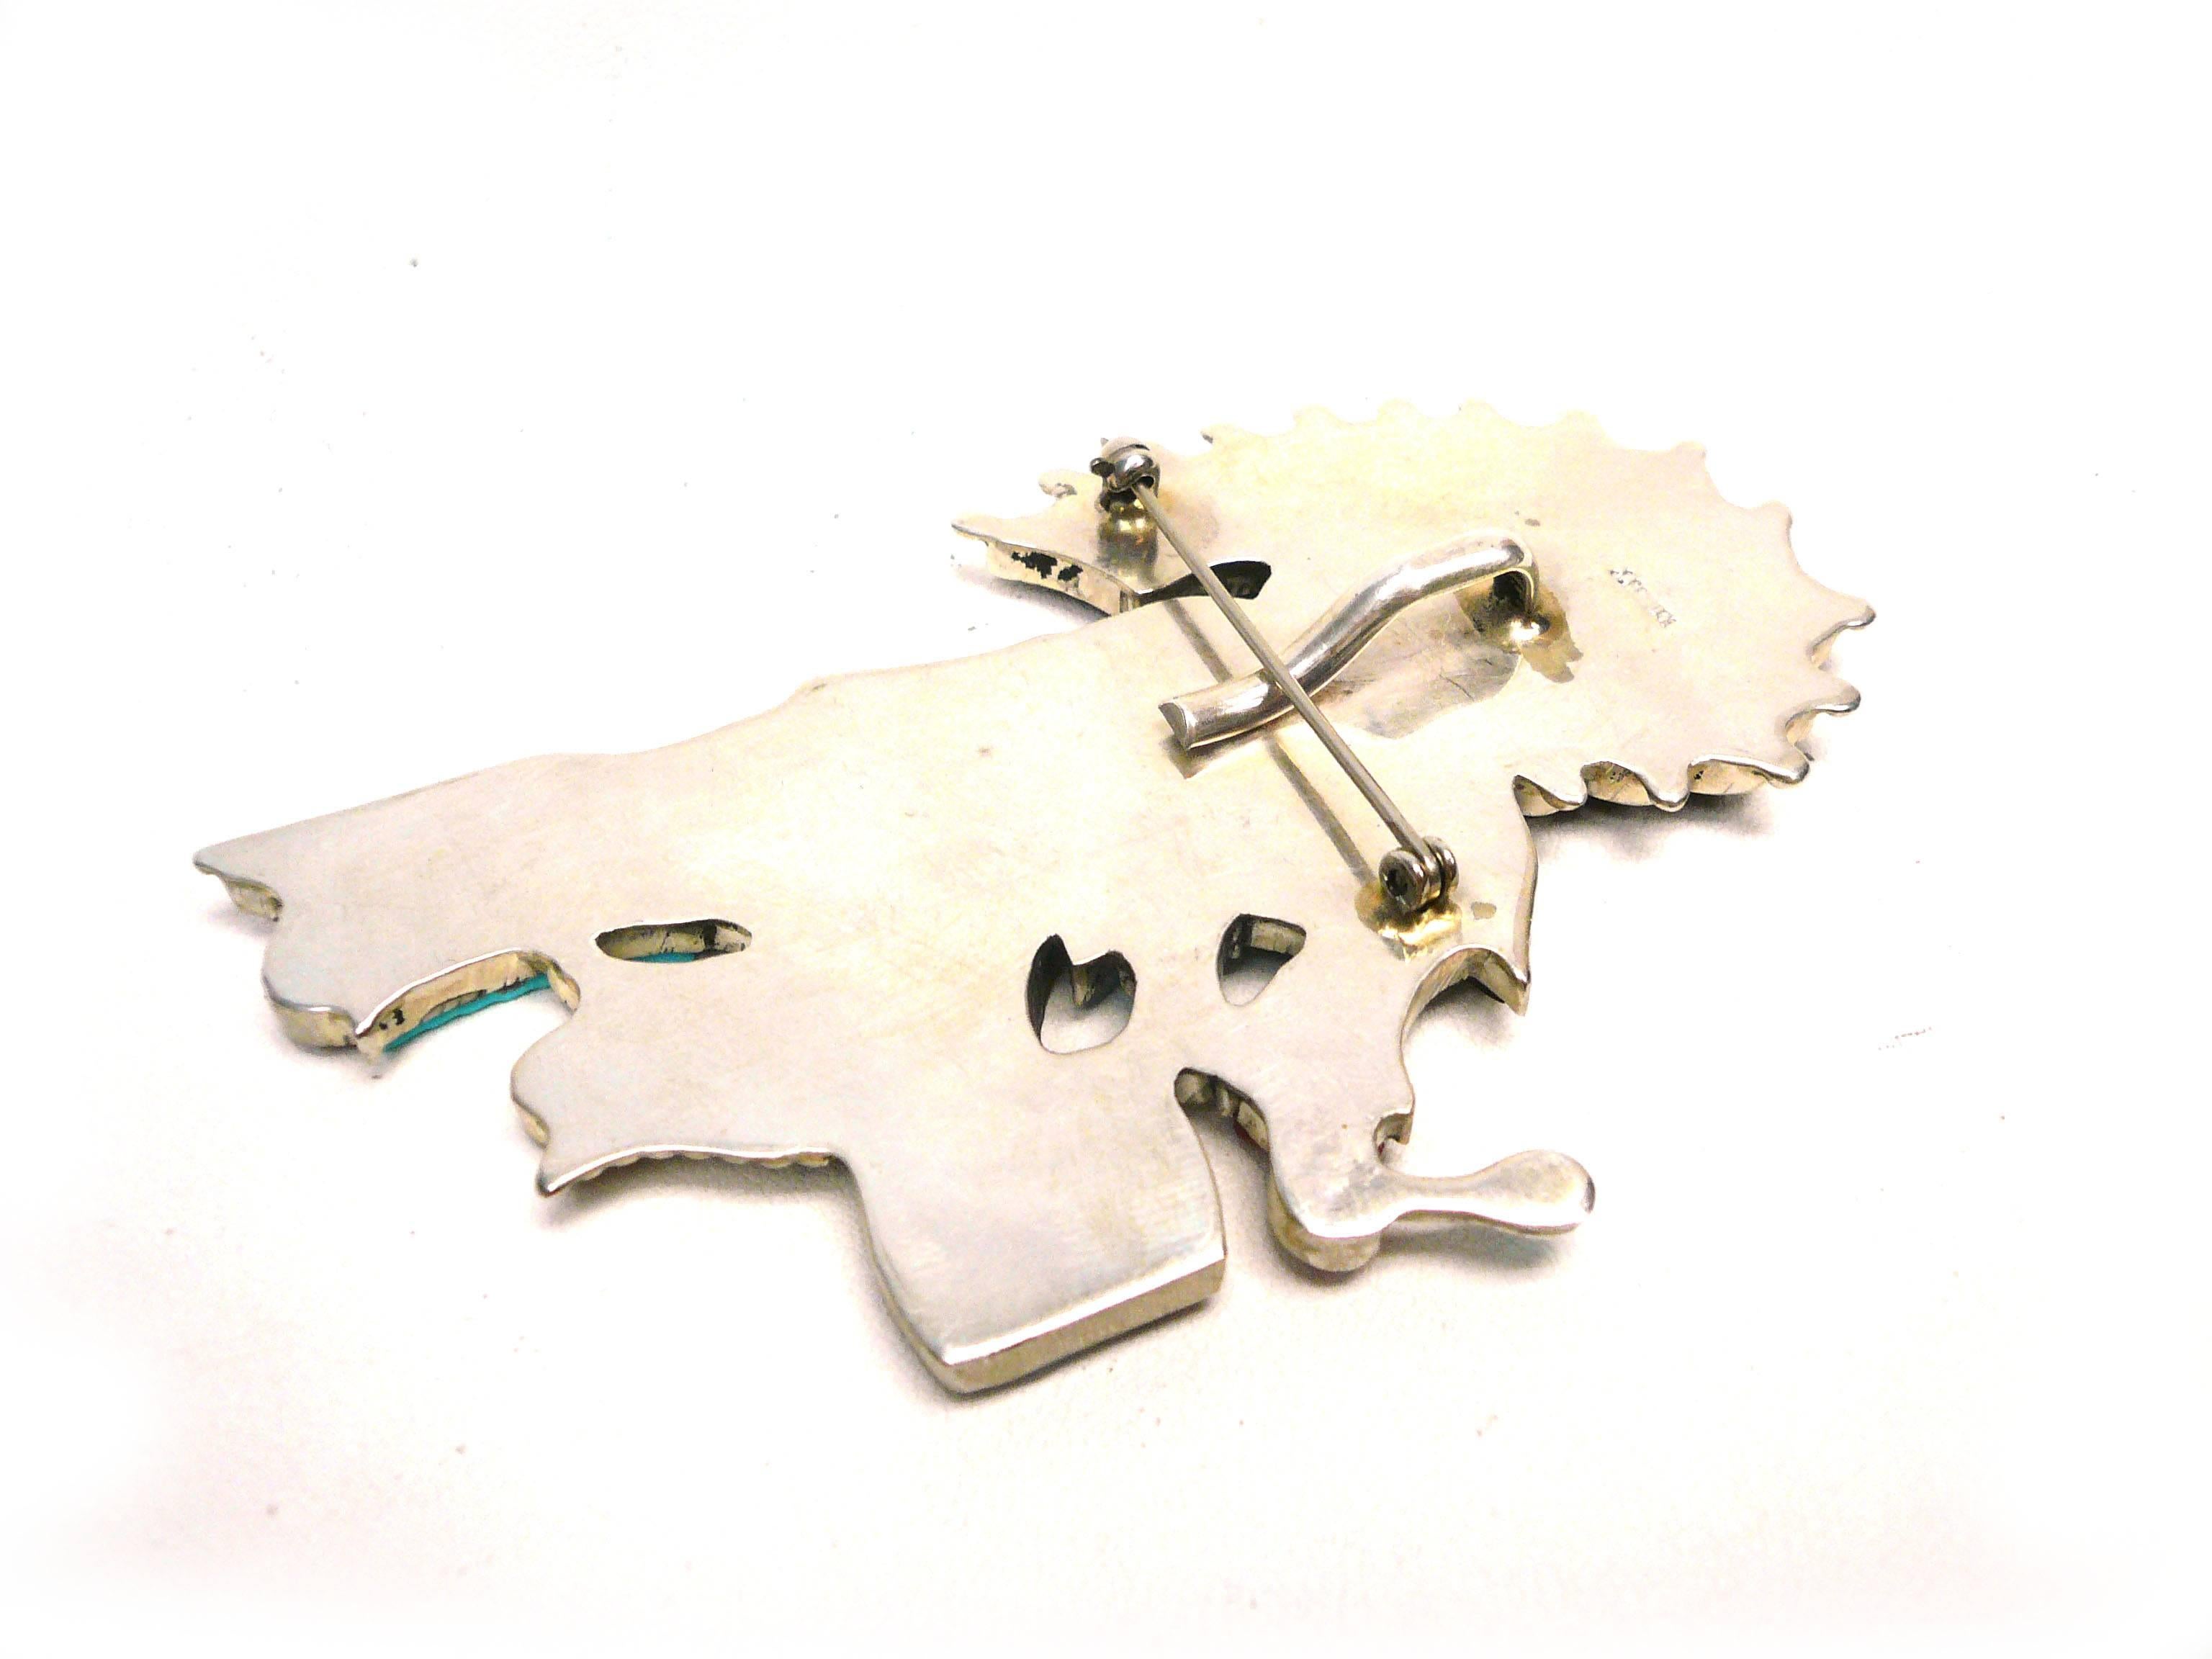 Made of sterling this charming drummer pendant/brooch features mother of pearl, turquoise, coral and abalone inlay. The Zuni are known for their impeccable inlay skills.
Artist J Beyuka's designs are inspired by his famous father Eddie